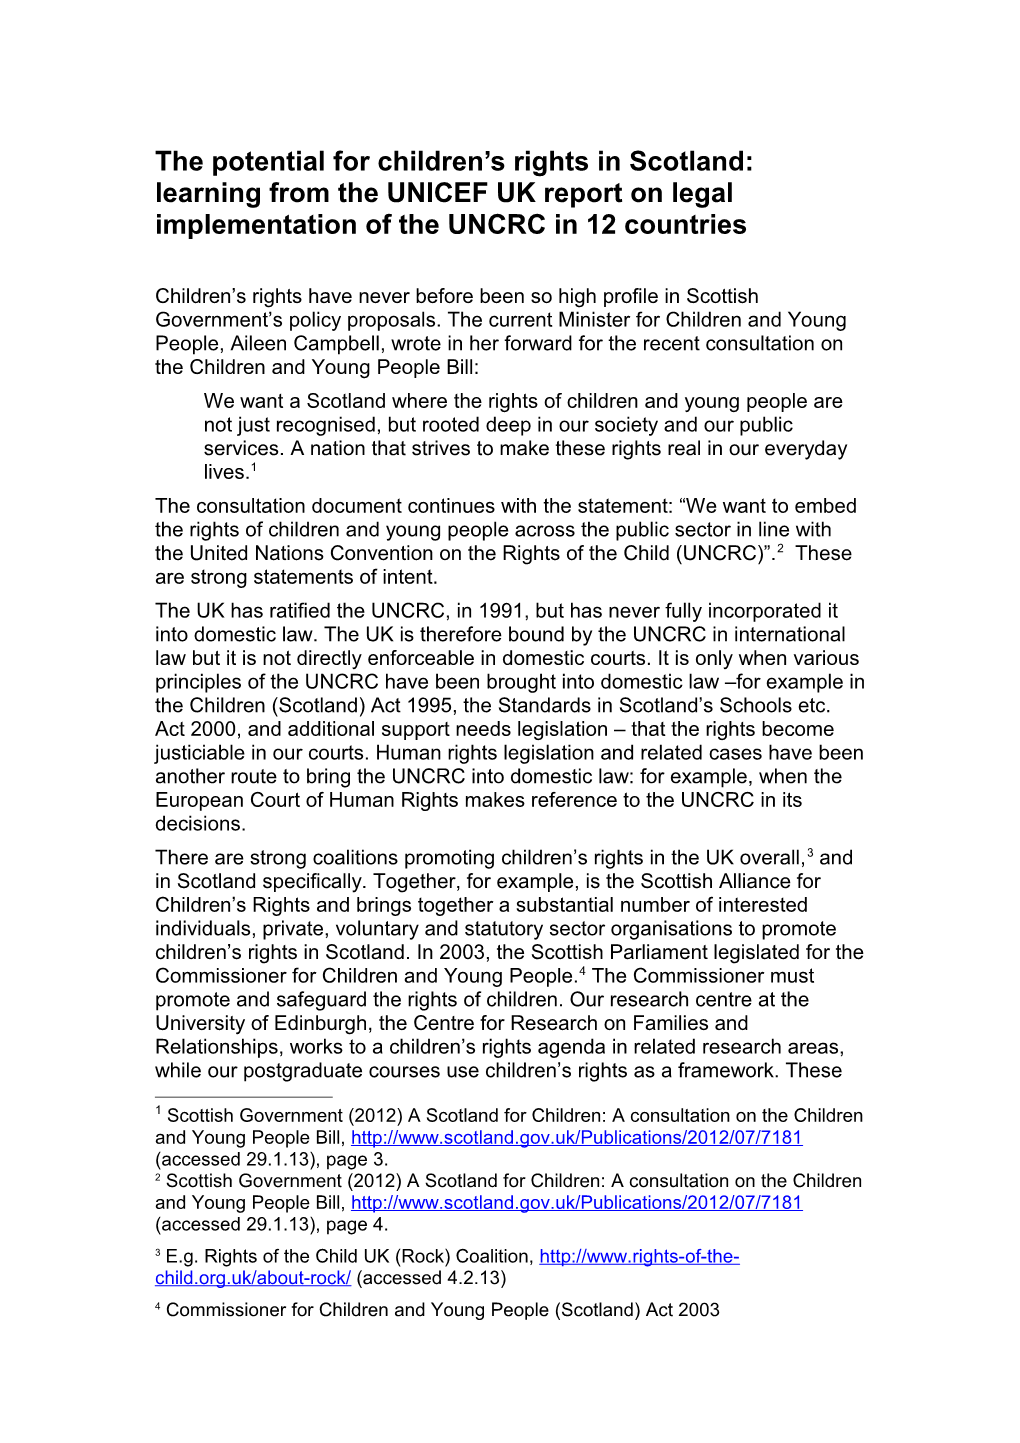 The Potential for Children S Rights in Scotland: Learning from the UNICEF Report on Legal